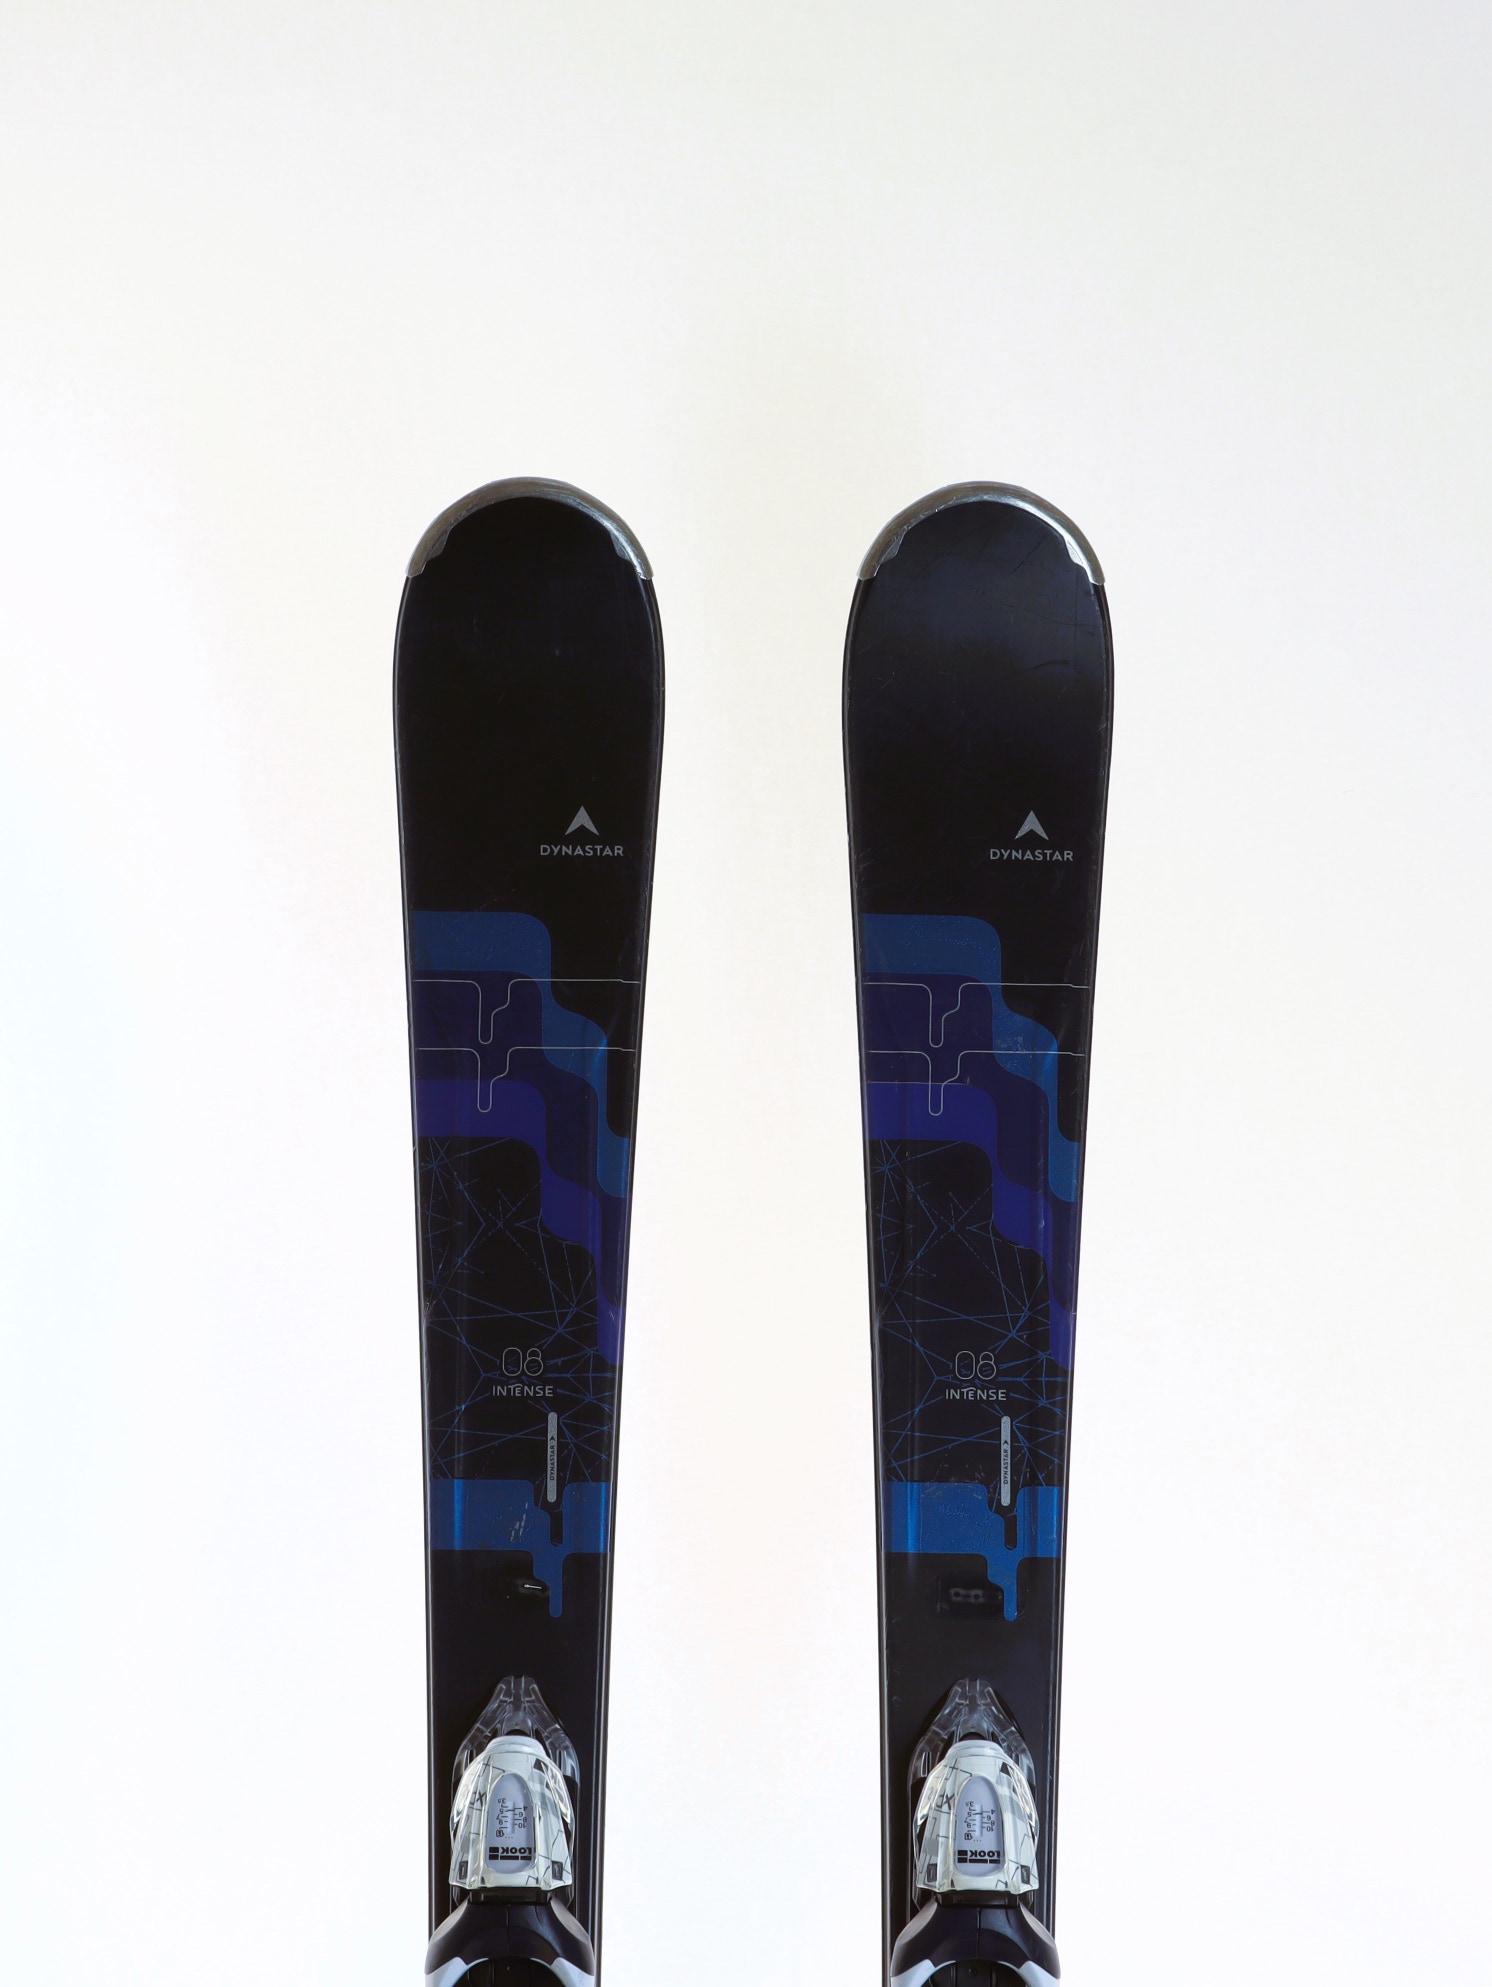 Used 2020 Dynastar Intense 8 Demo Ski with Look Xpress 10 Bindings Size 144 (Option 231323)